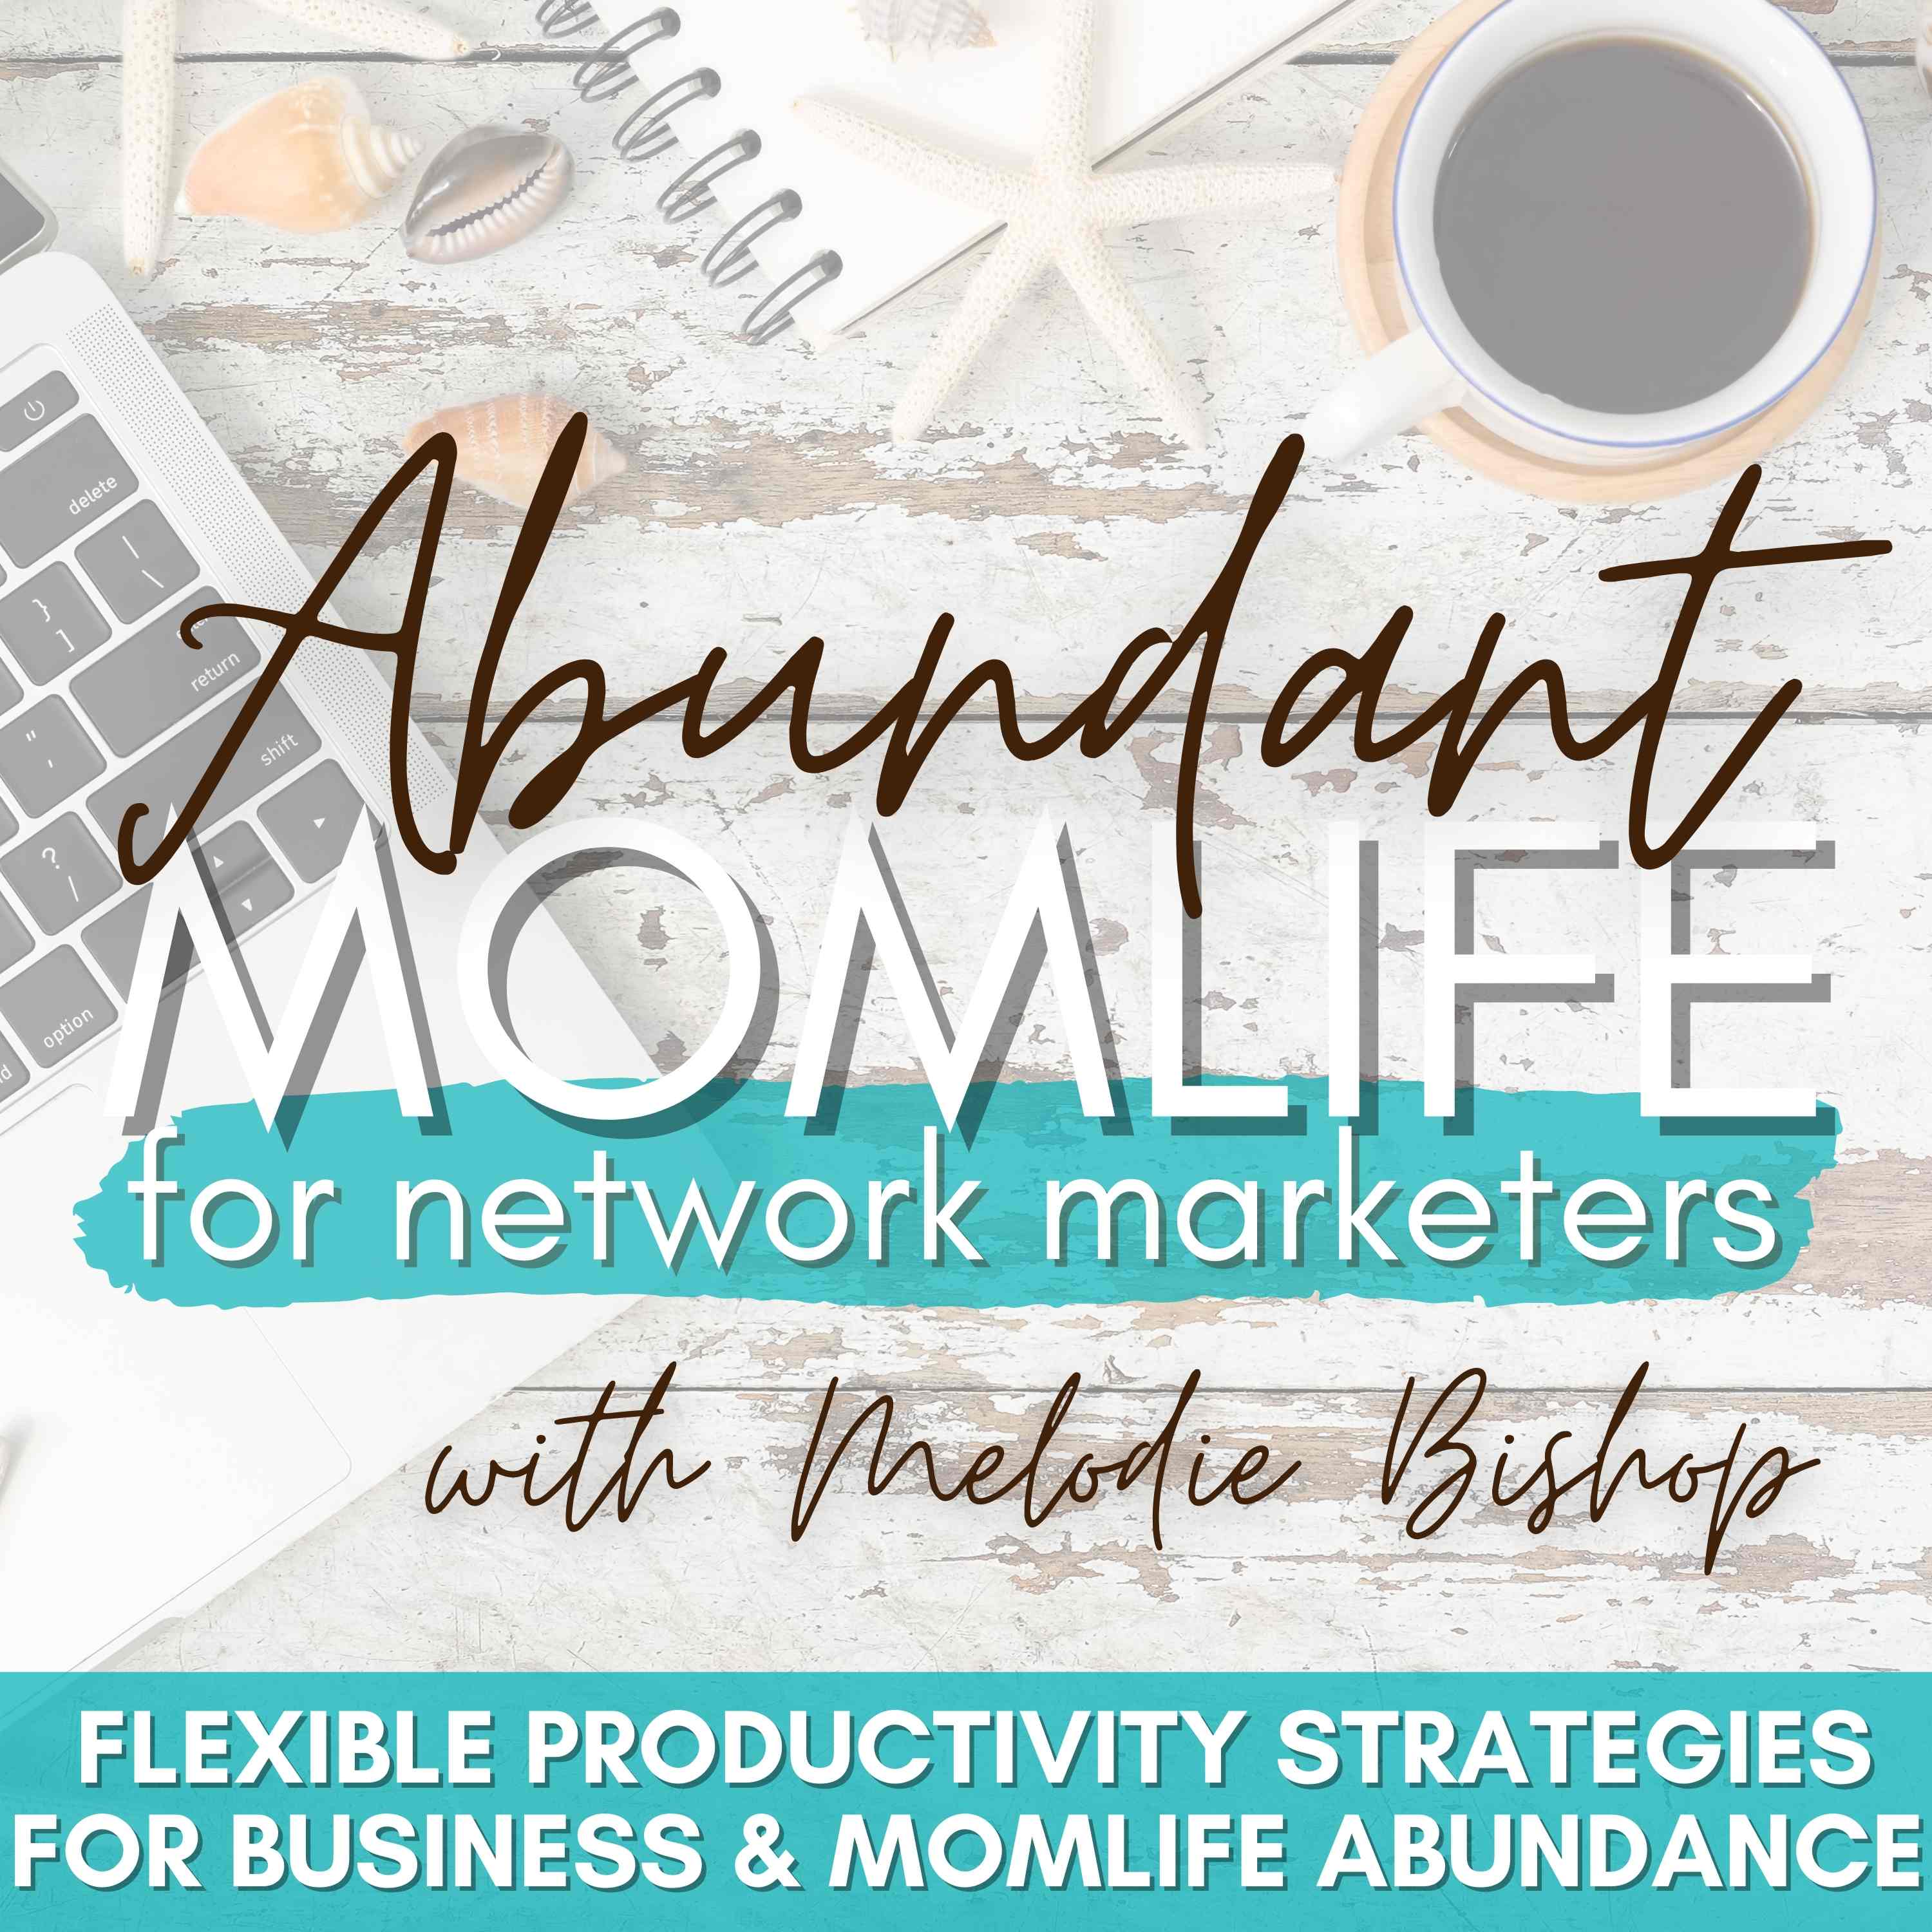 Abundant MomLife for Network Marketers Show - Christian Network Marketing Productivity & Business Success Strategies for Moms in Direct Sales, MLM, Social Selling